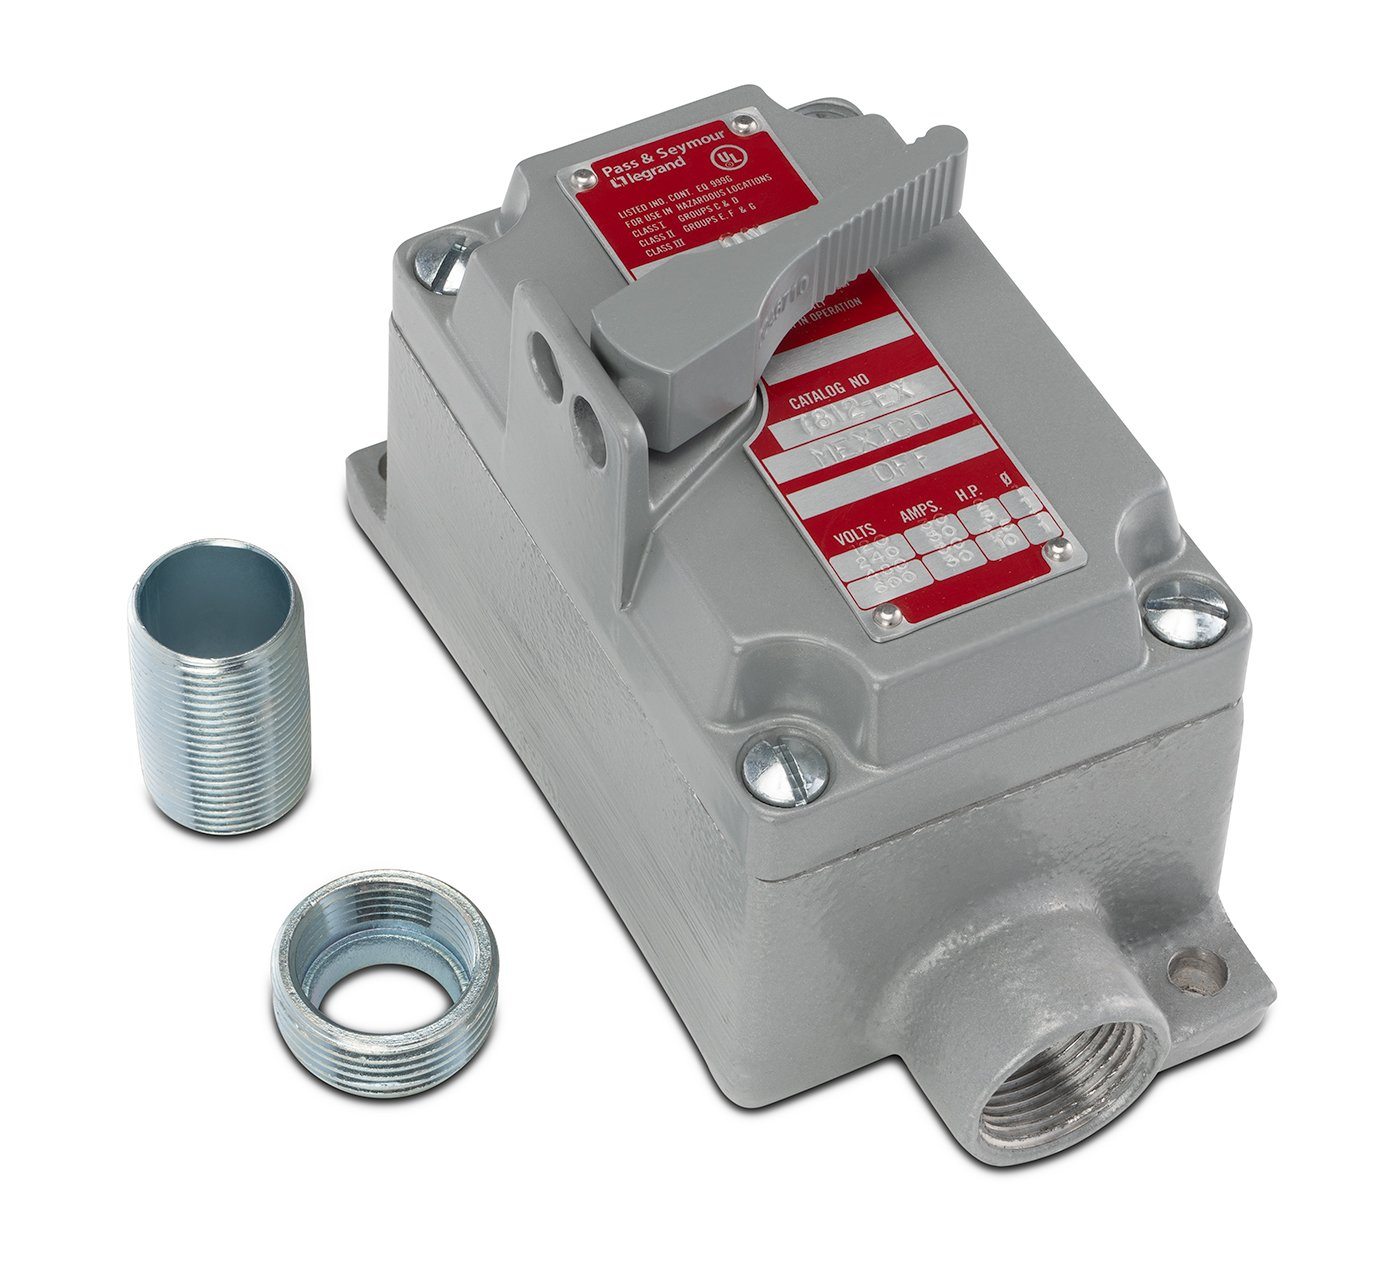 Enclosed Motor Switch Hazardous-Location - UL Listed / CSA Certified for MVP Recovery Pumps New Products BVV 